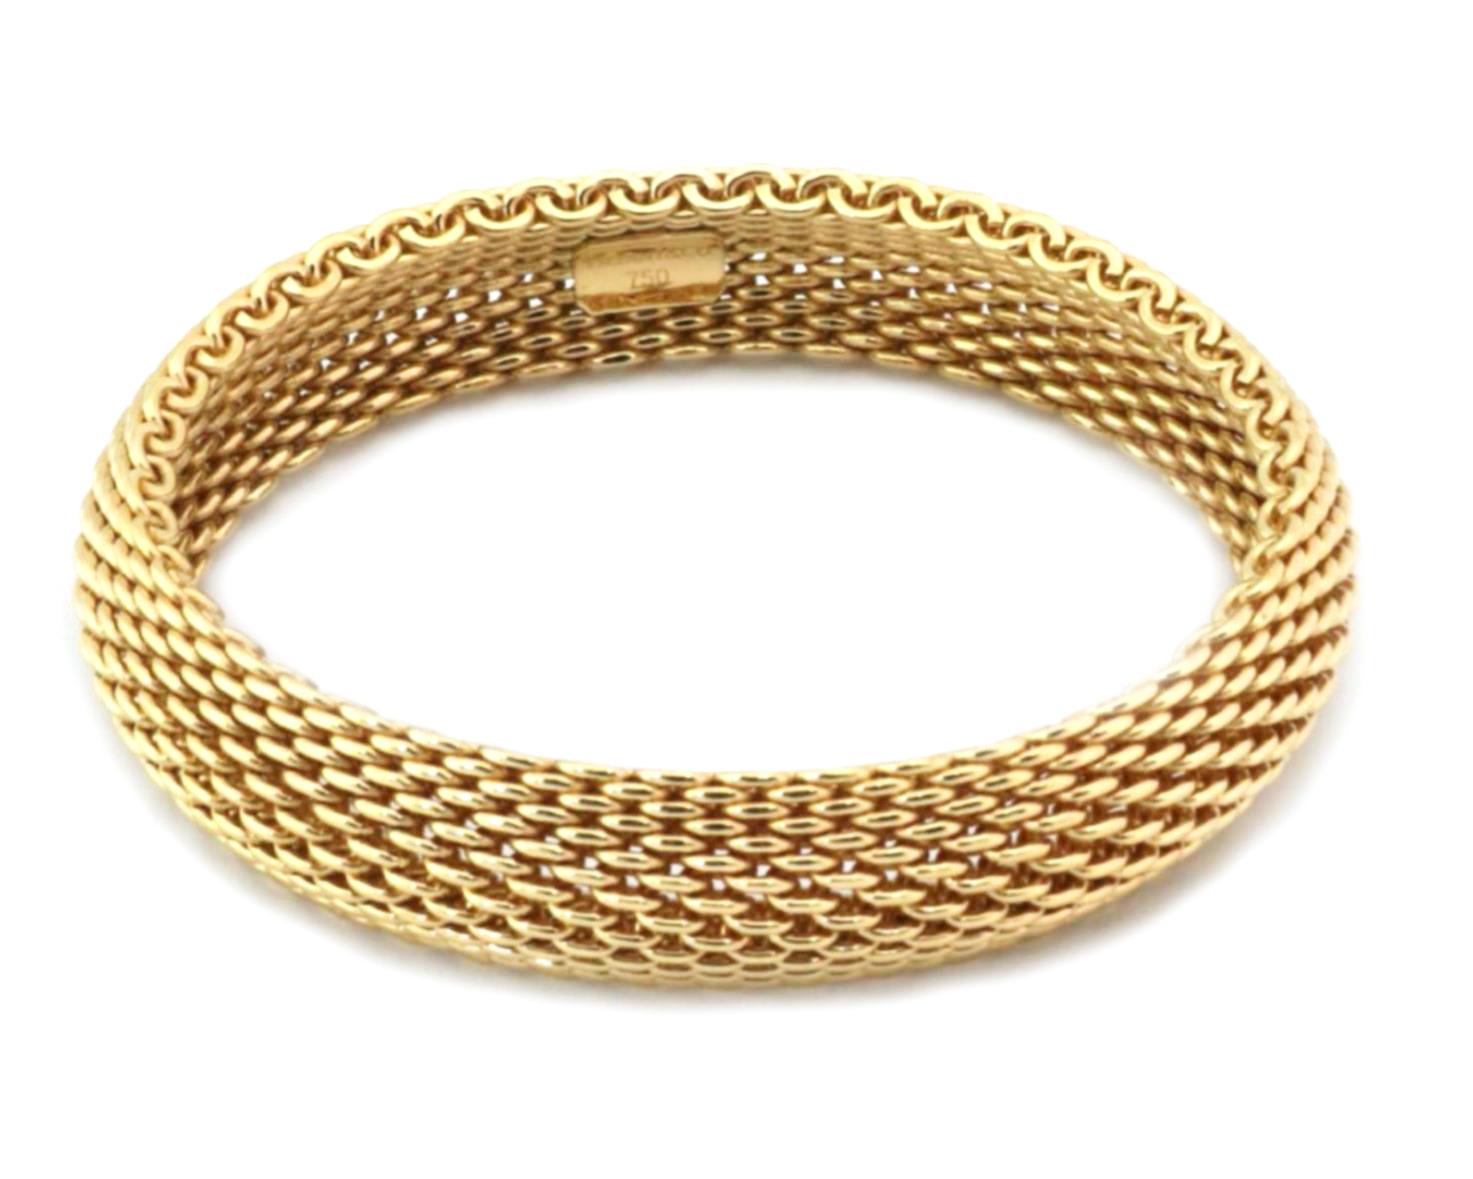 This gorgeous authentic bracelet is by Tiffany & Co. from their Somerset collection, the 15mm wide mesh flexible band is crafted from 18k yellow gold in a fine polished finish. It is hallmarked with the designer name and metal content.

Brand: 